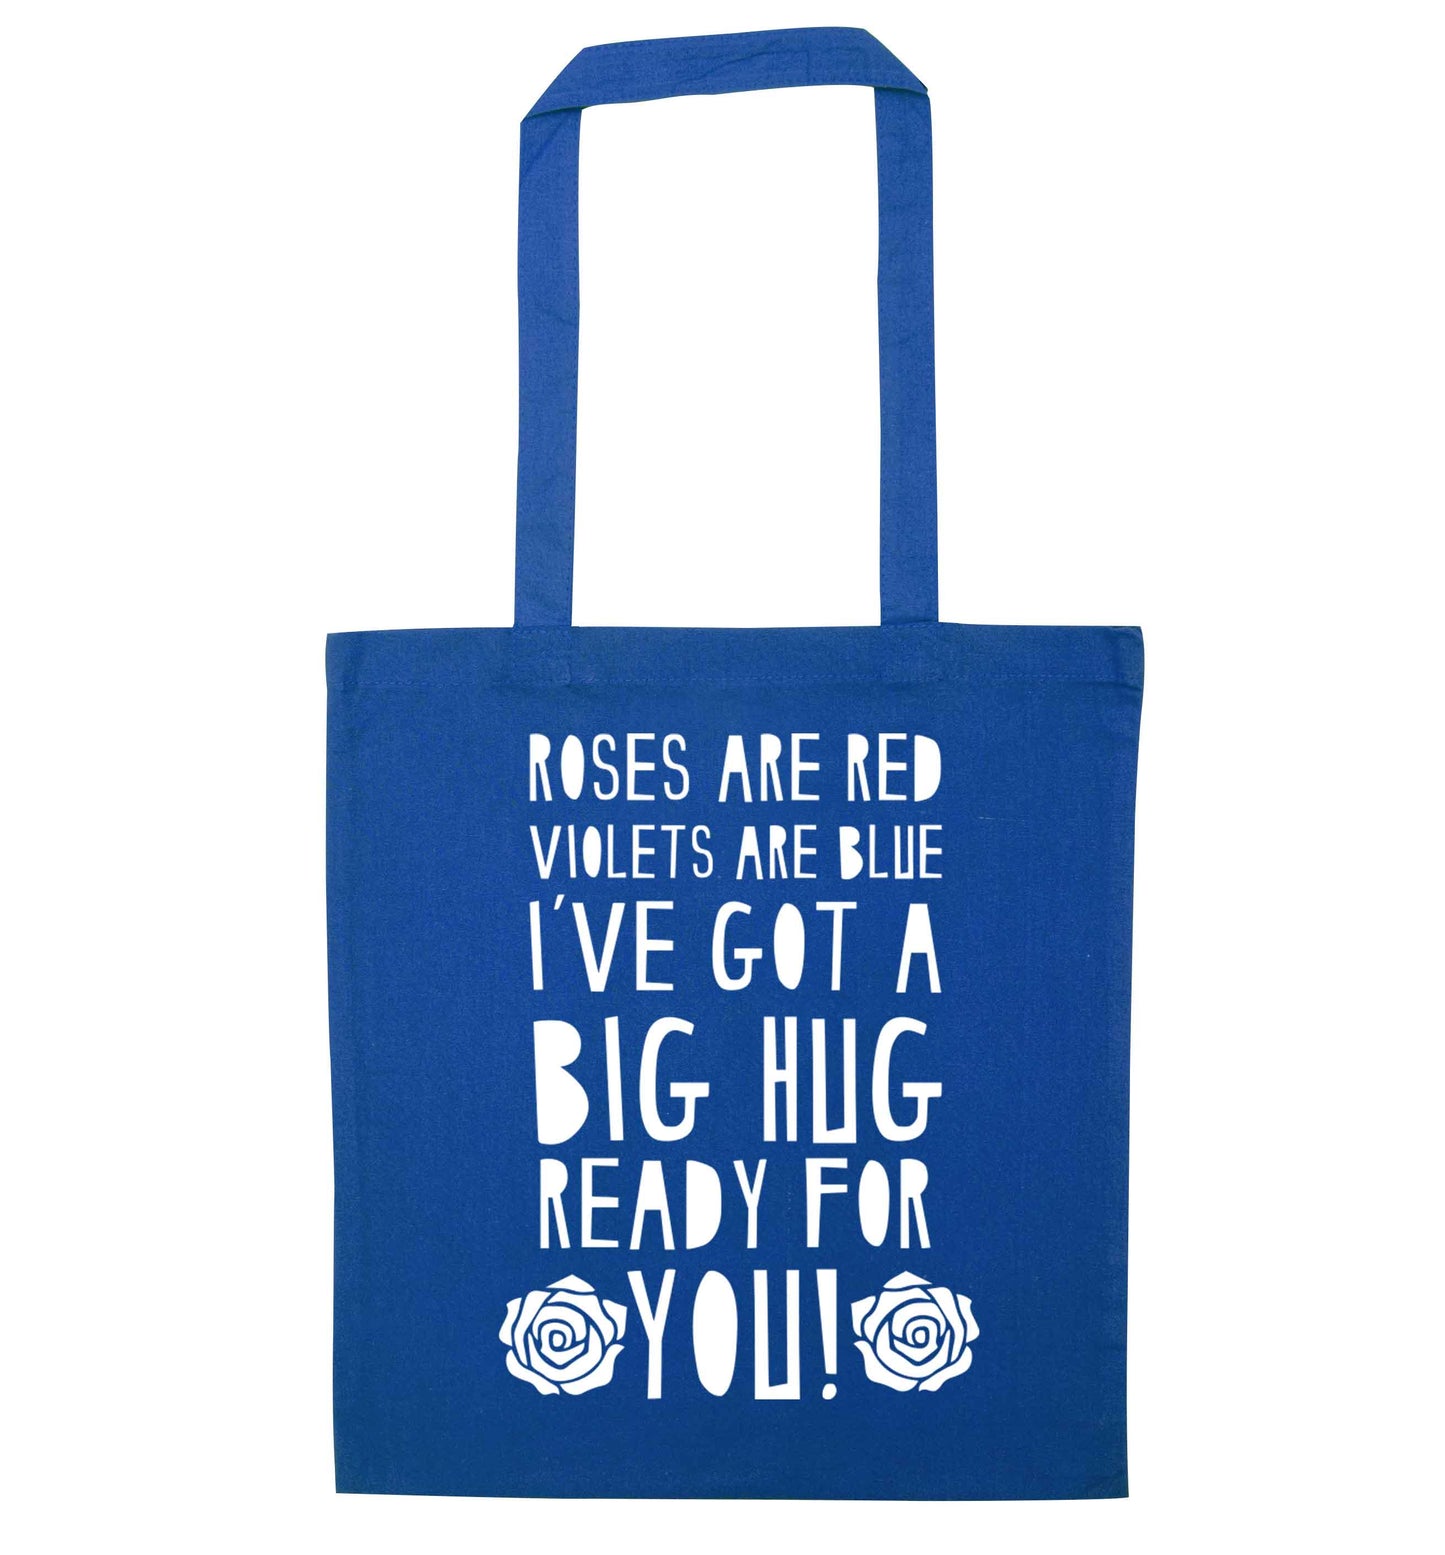 Roses are red violets are blue I've got a big hug coming for you blue tote bag